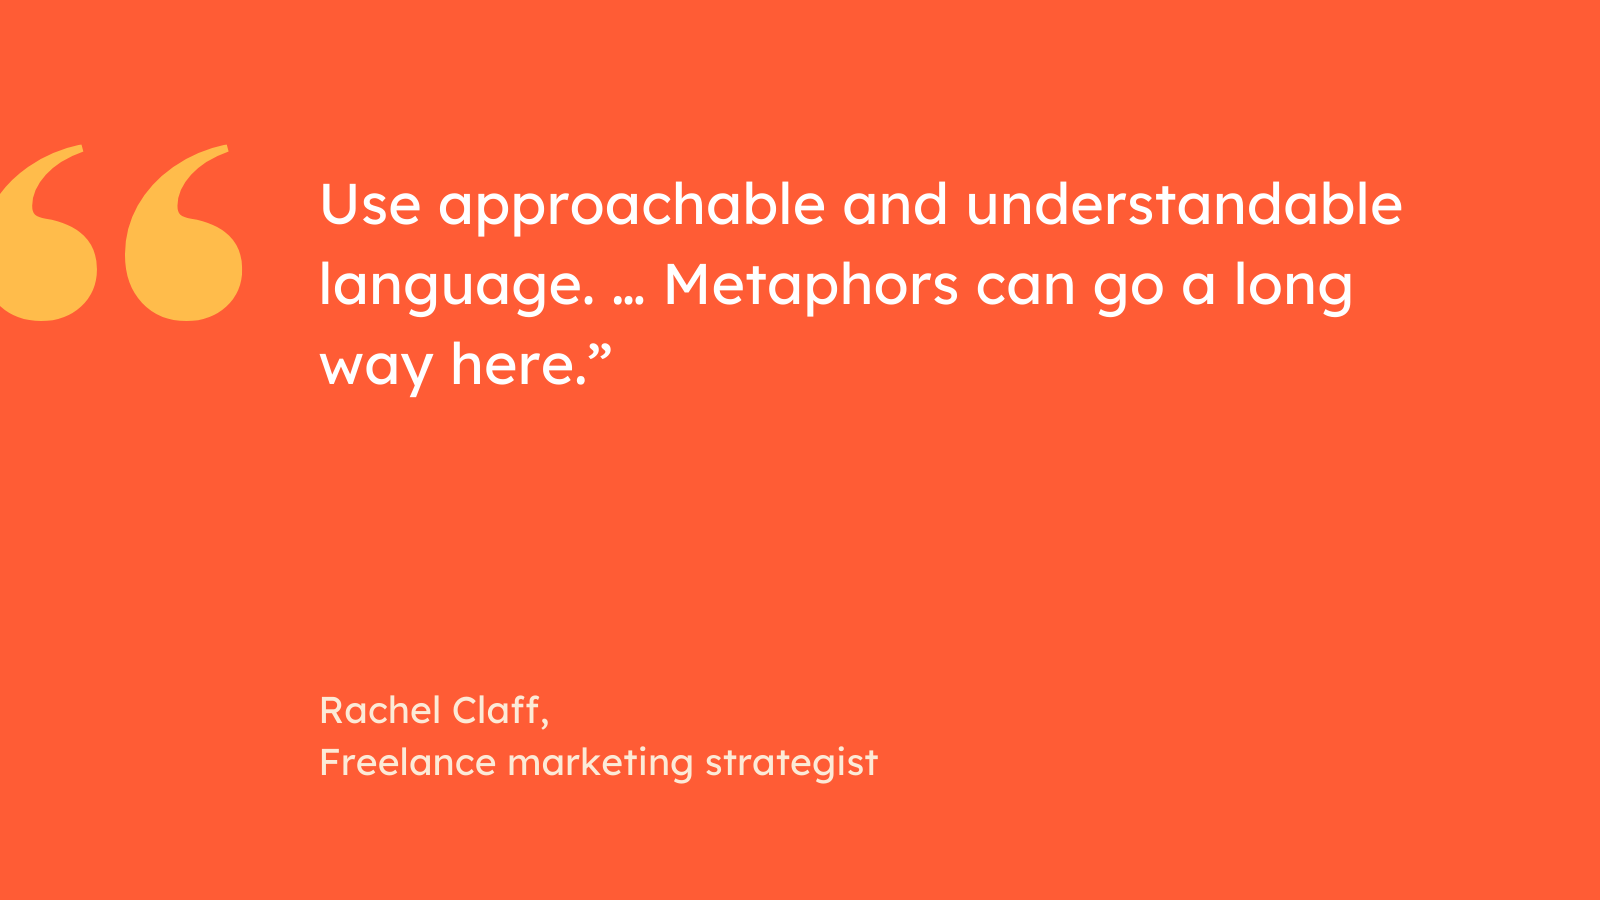 “Use approachable and understandable language. … Metaphors can go a long way here.” Rachel Claff, Freelance marketing strategist